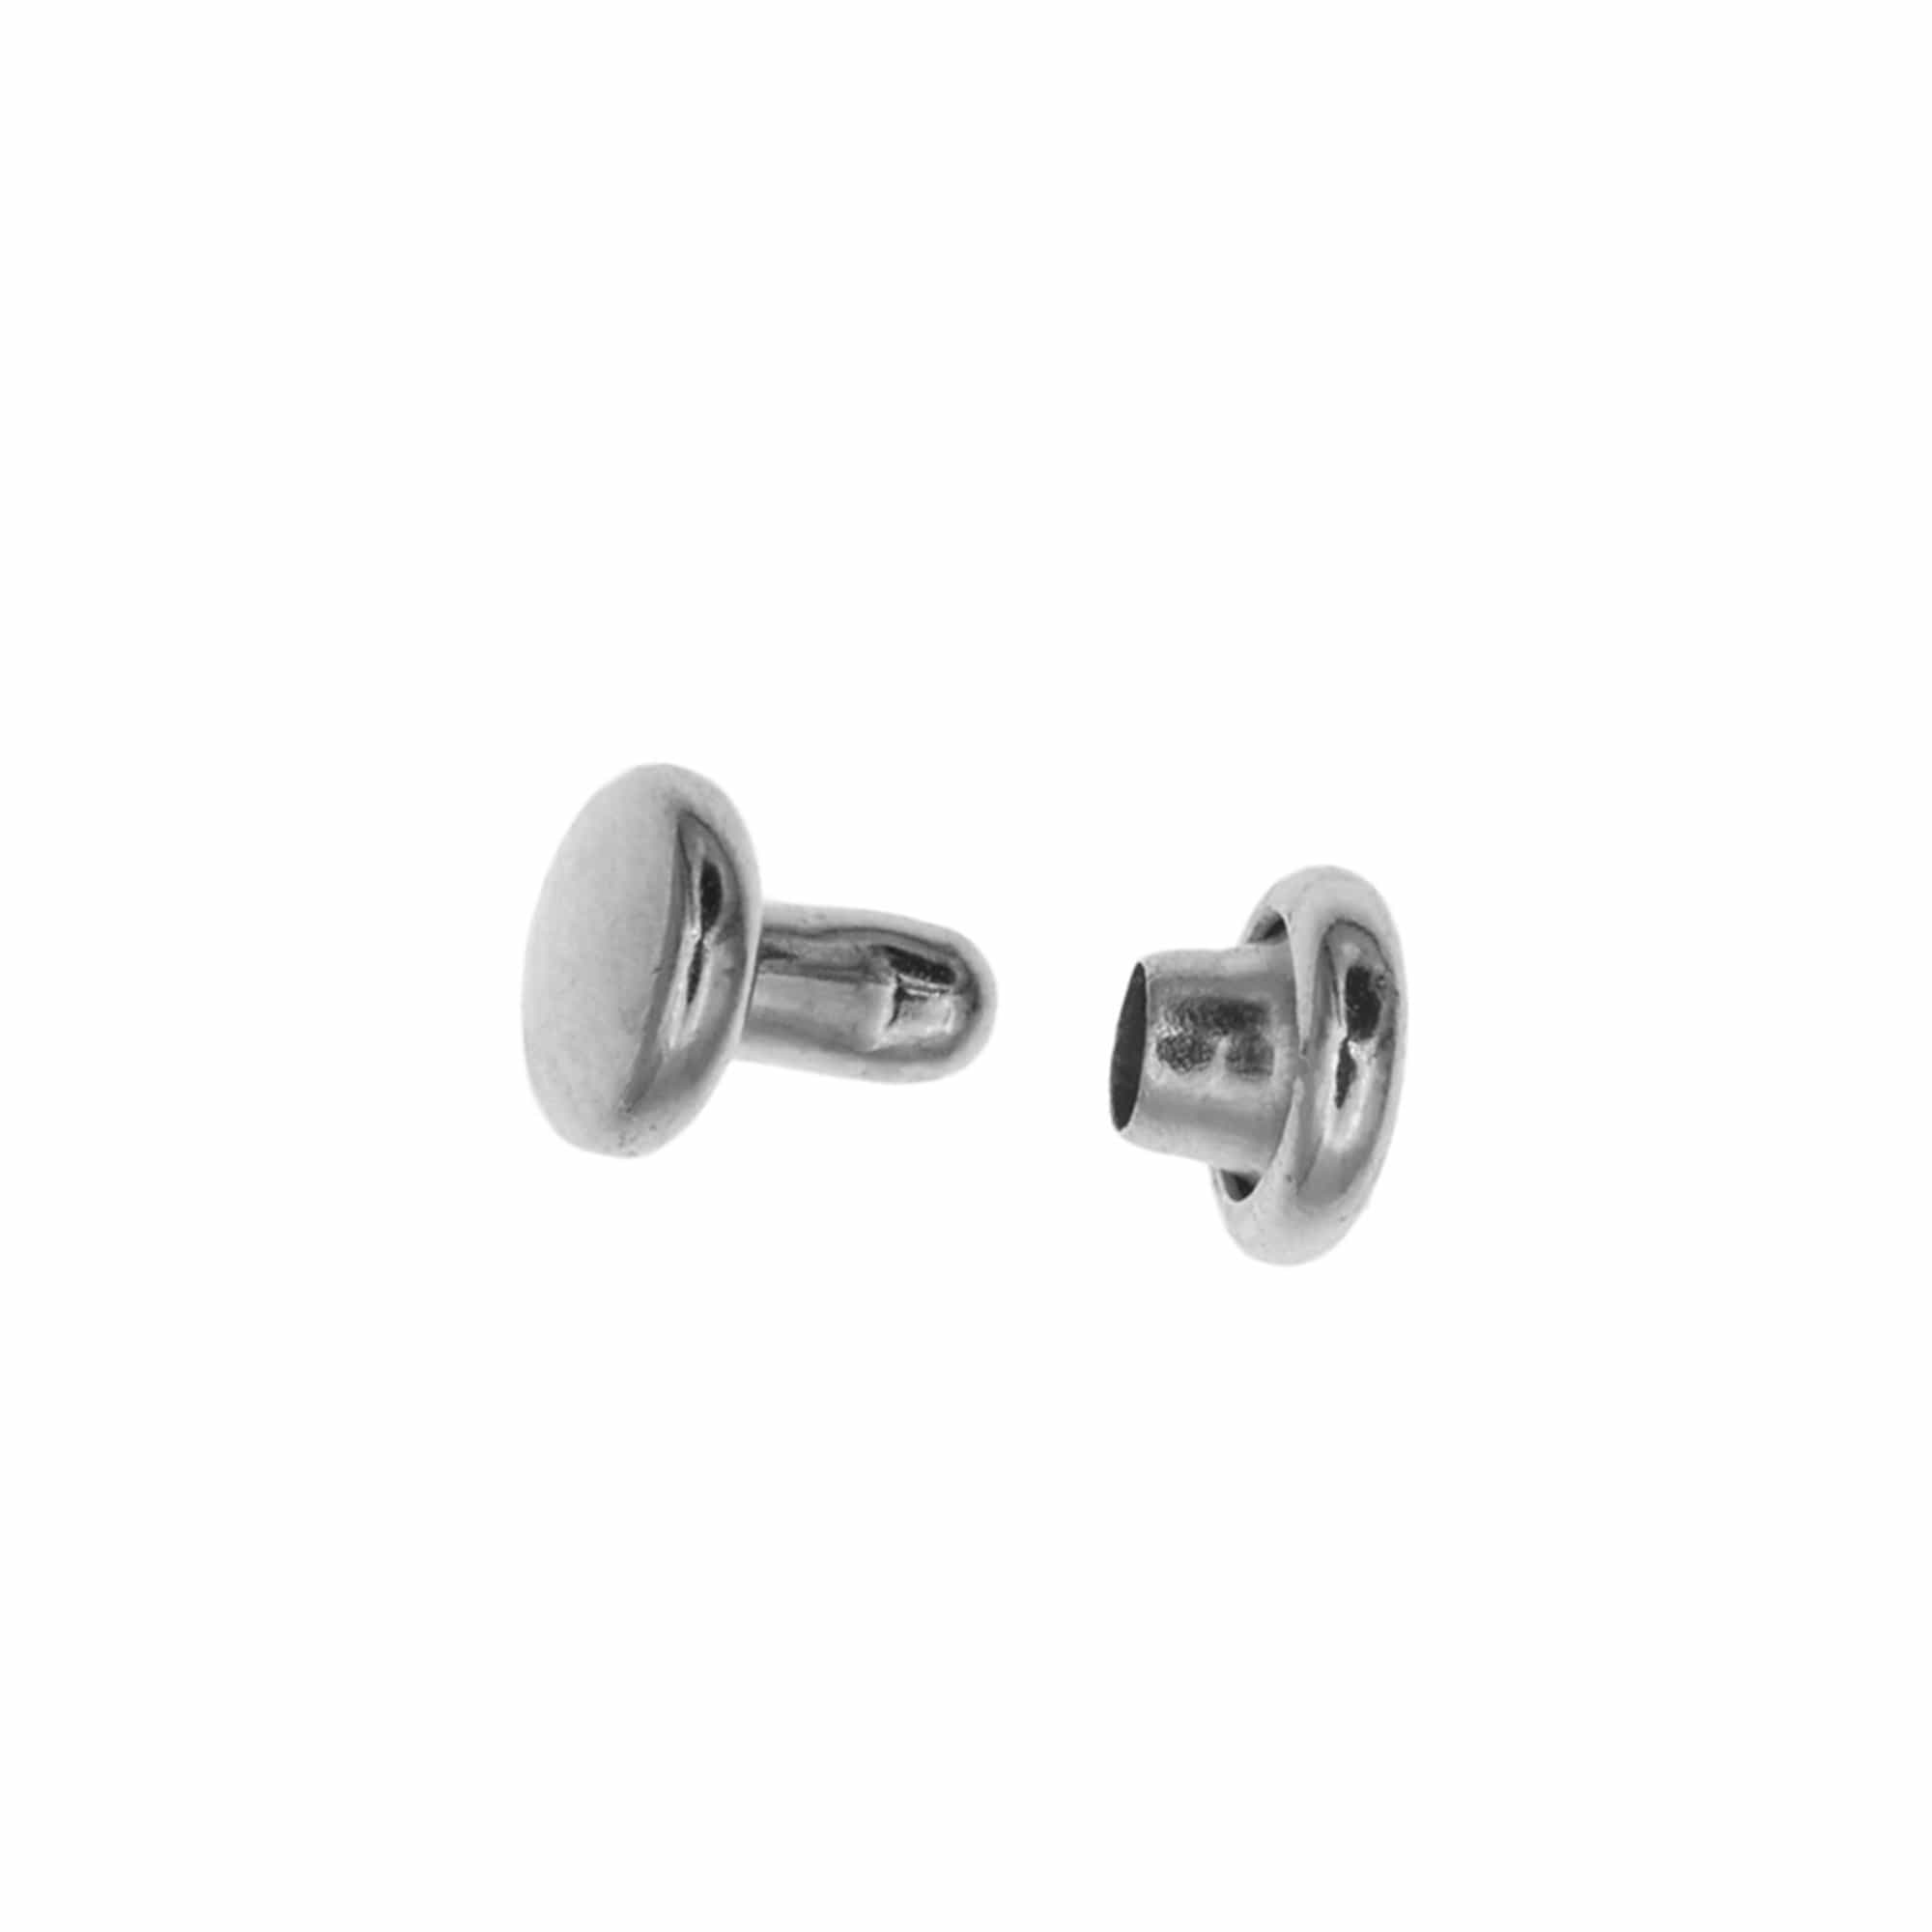 Ohio Travel Bag Fasteners 6mm Nickel Plate, Double Cap Jiffy Rivet, Steel, #A-337-NP A-337-NP